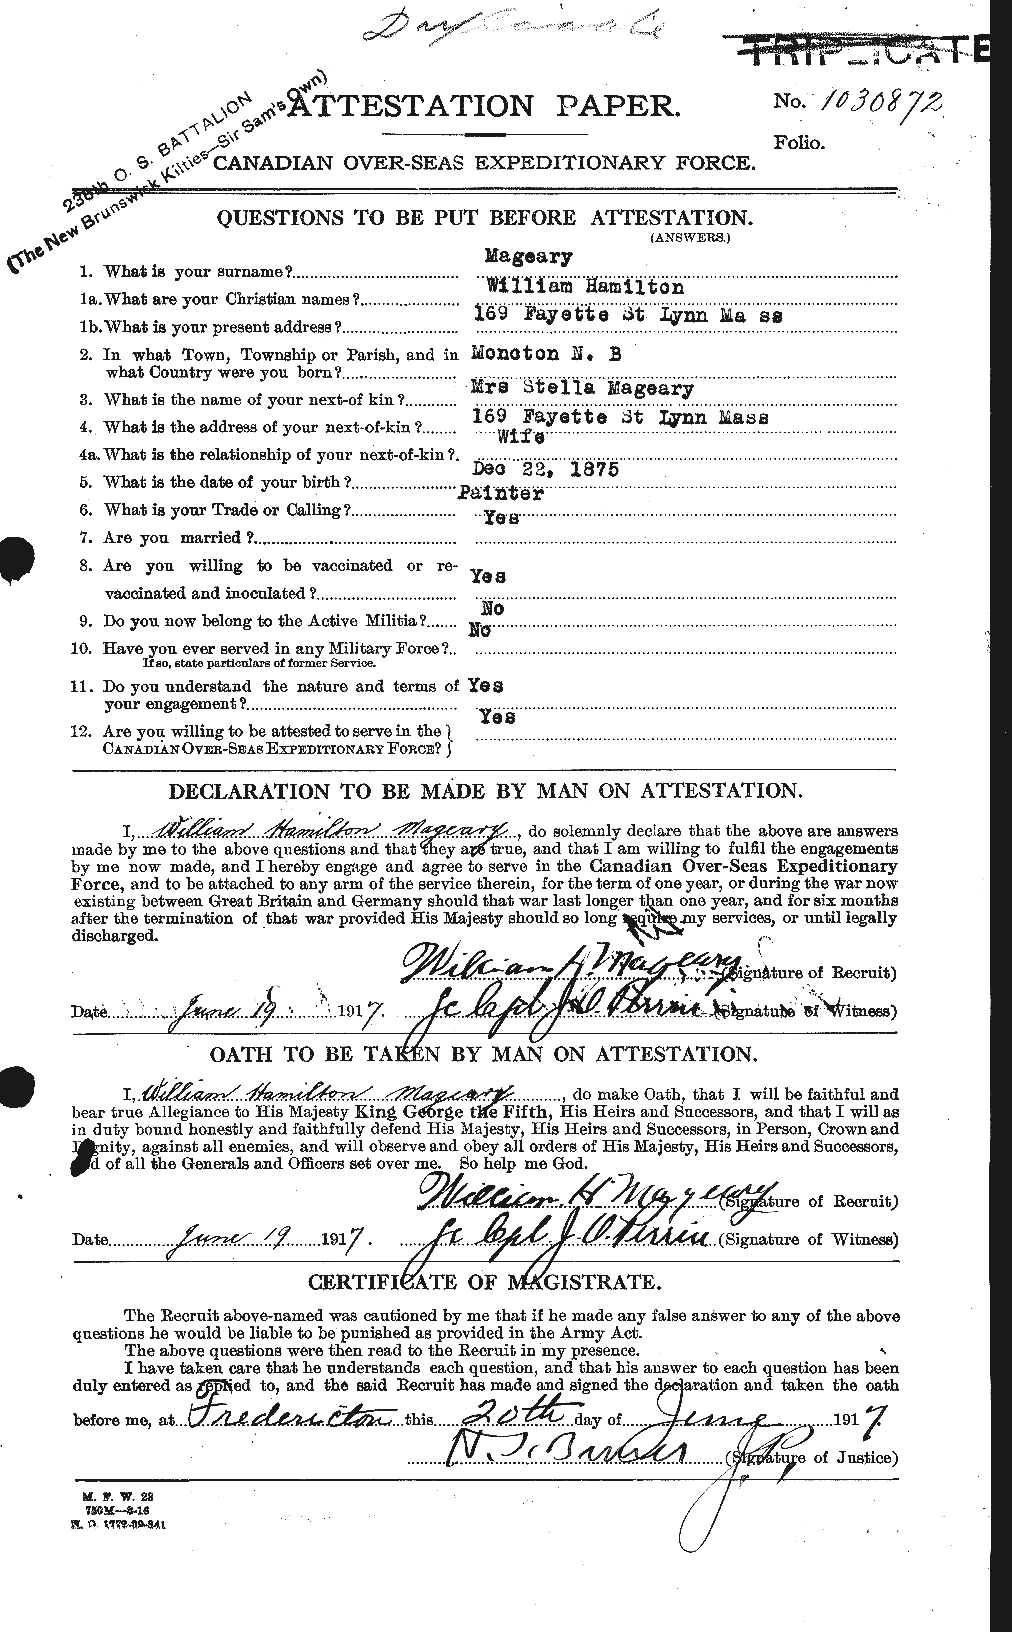 Personnel Records of the First World War - CEF 476768a